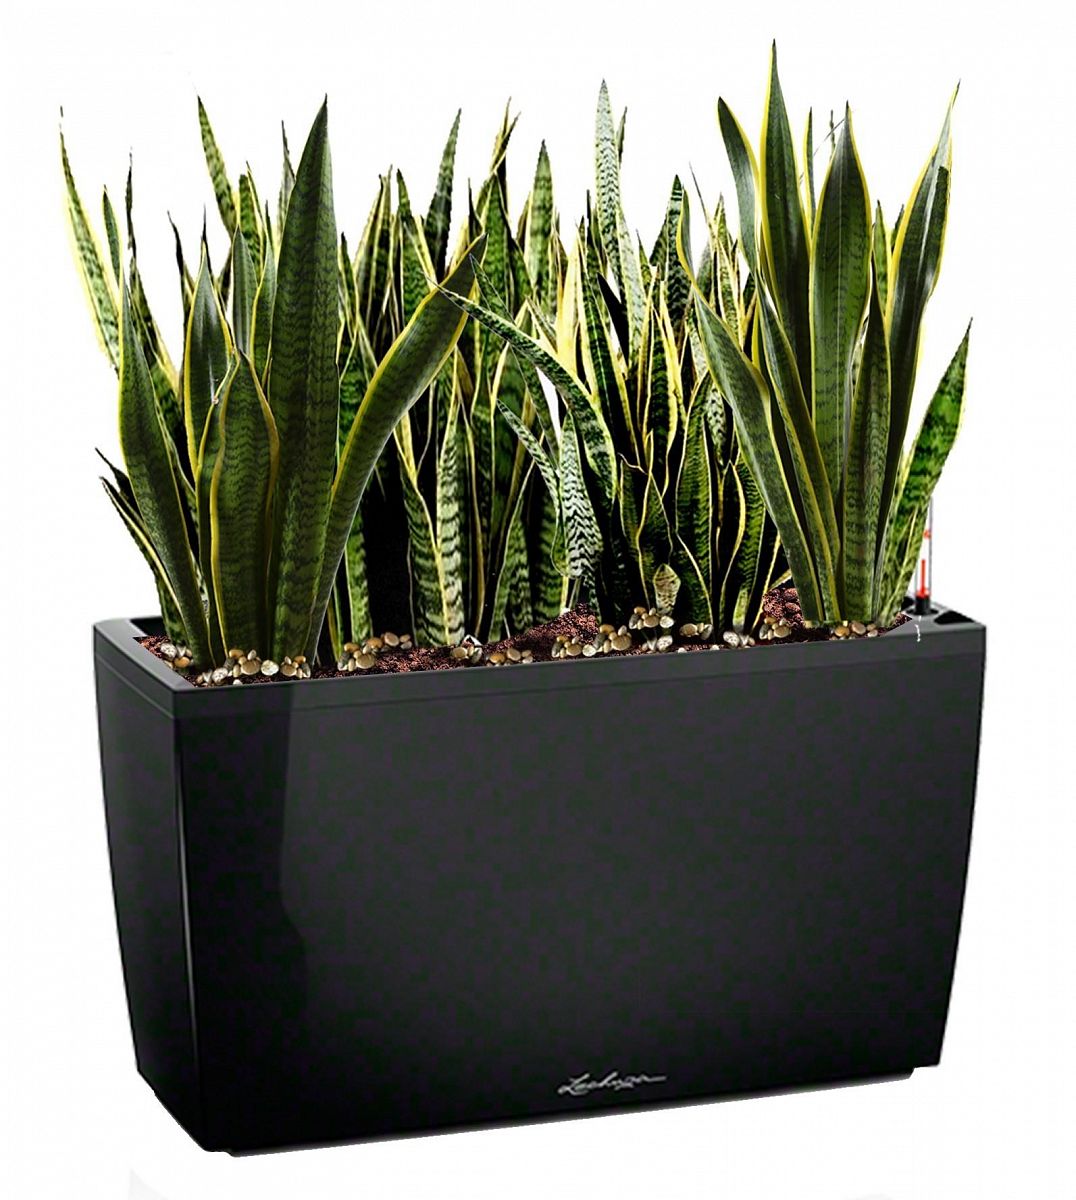 Sansevieria Green Wall in LECHUZA CARARO Self-watering Planter, Total Height 80 cm